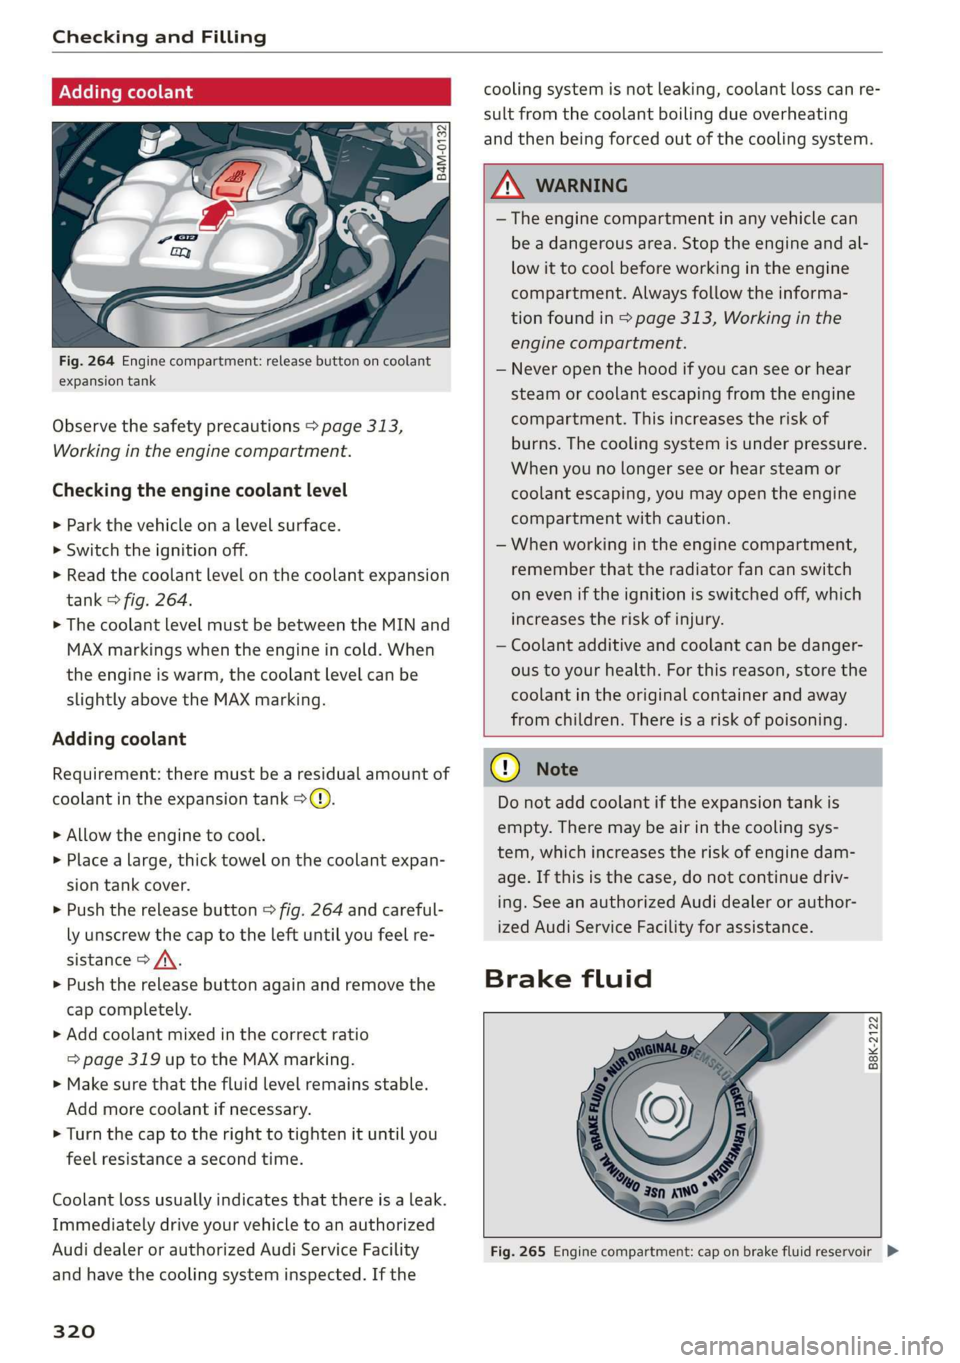 AUDI Q7 2019  Owner´s Manual CheckingandFilling
 
Addingcoolant
 
Fig.264Enginecompartment:releasebuttononcoolant
expansiontank
Observethesafetyprecautions>page313,
Workingintheenginecompartment.
Checkingtheenginecoolantlevel
>Pa